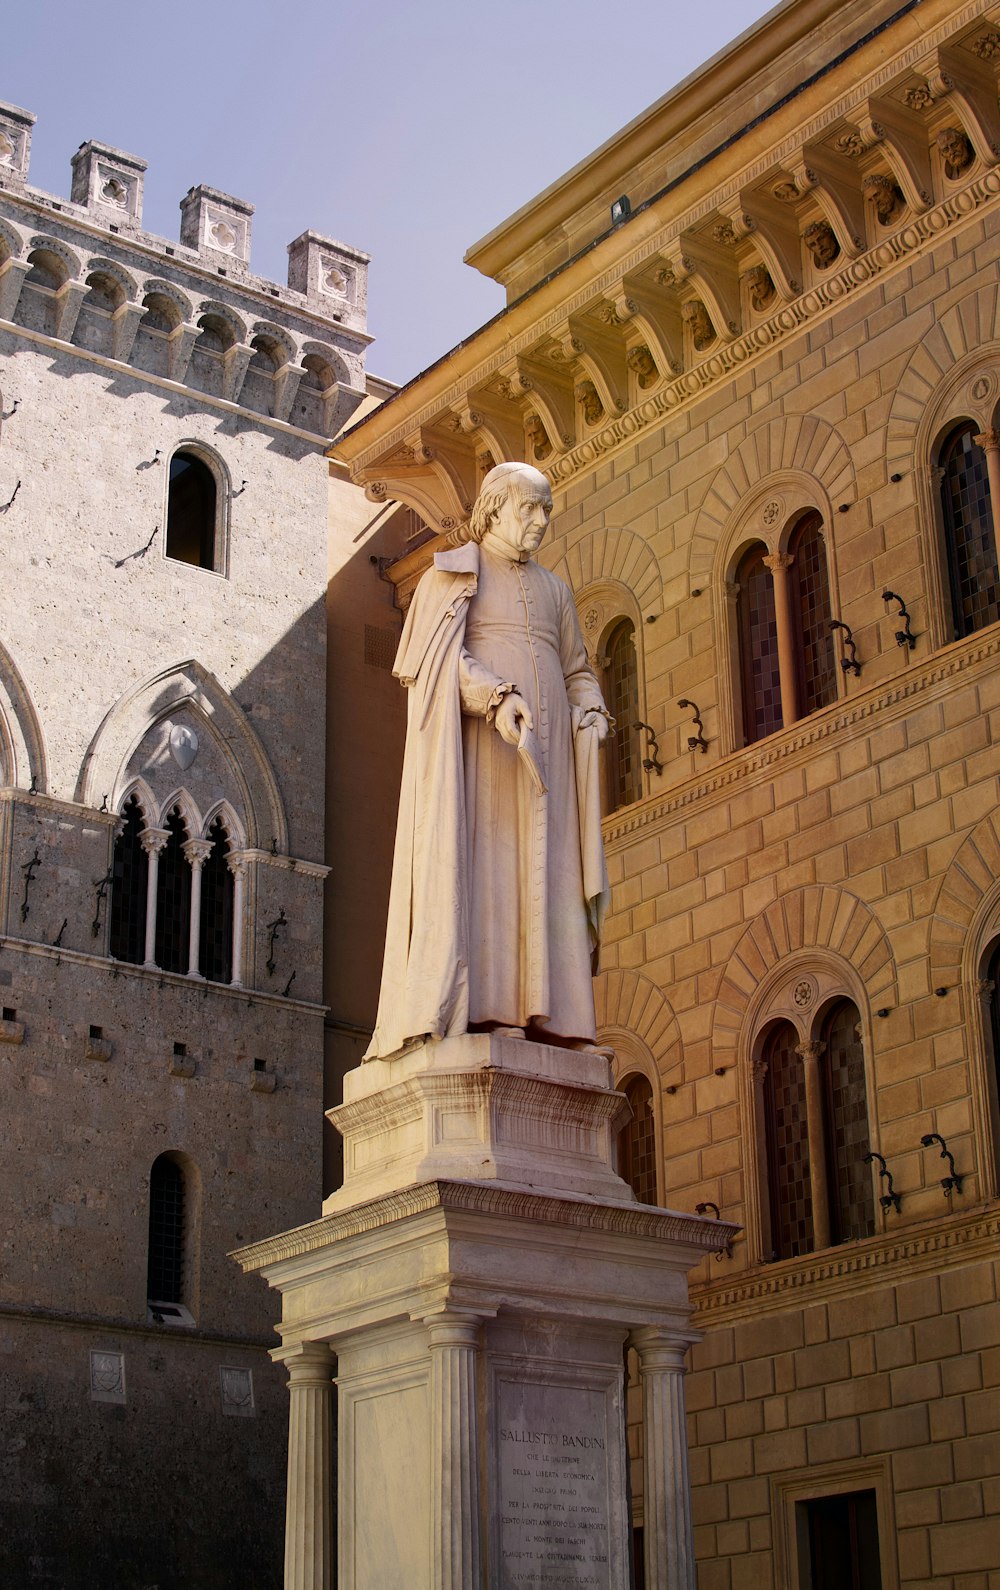 white statue of a woman in front of a building